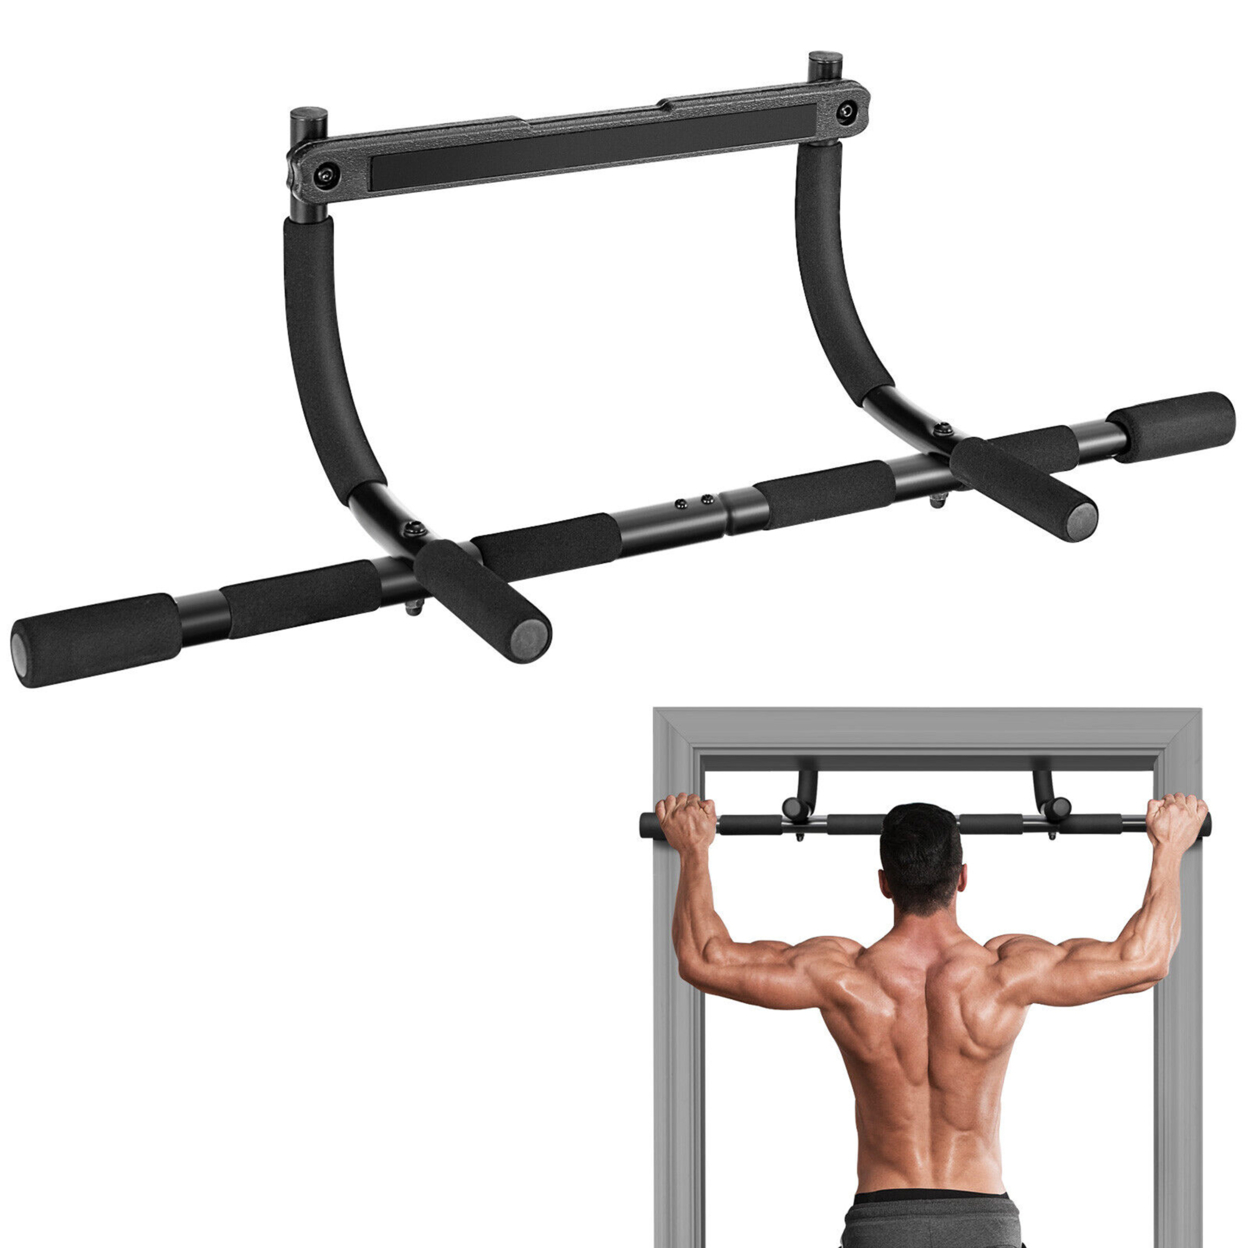 Multi-Grip Doorway Pull Up Bar W/ Foam Grips Total Upper Body Workout Home Gym